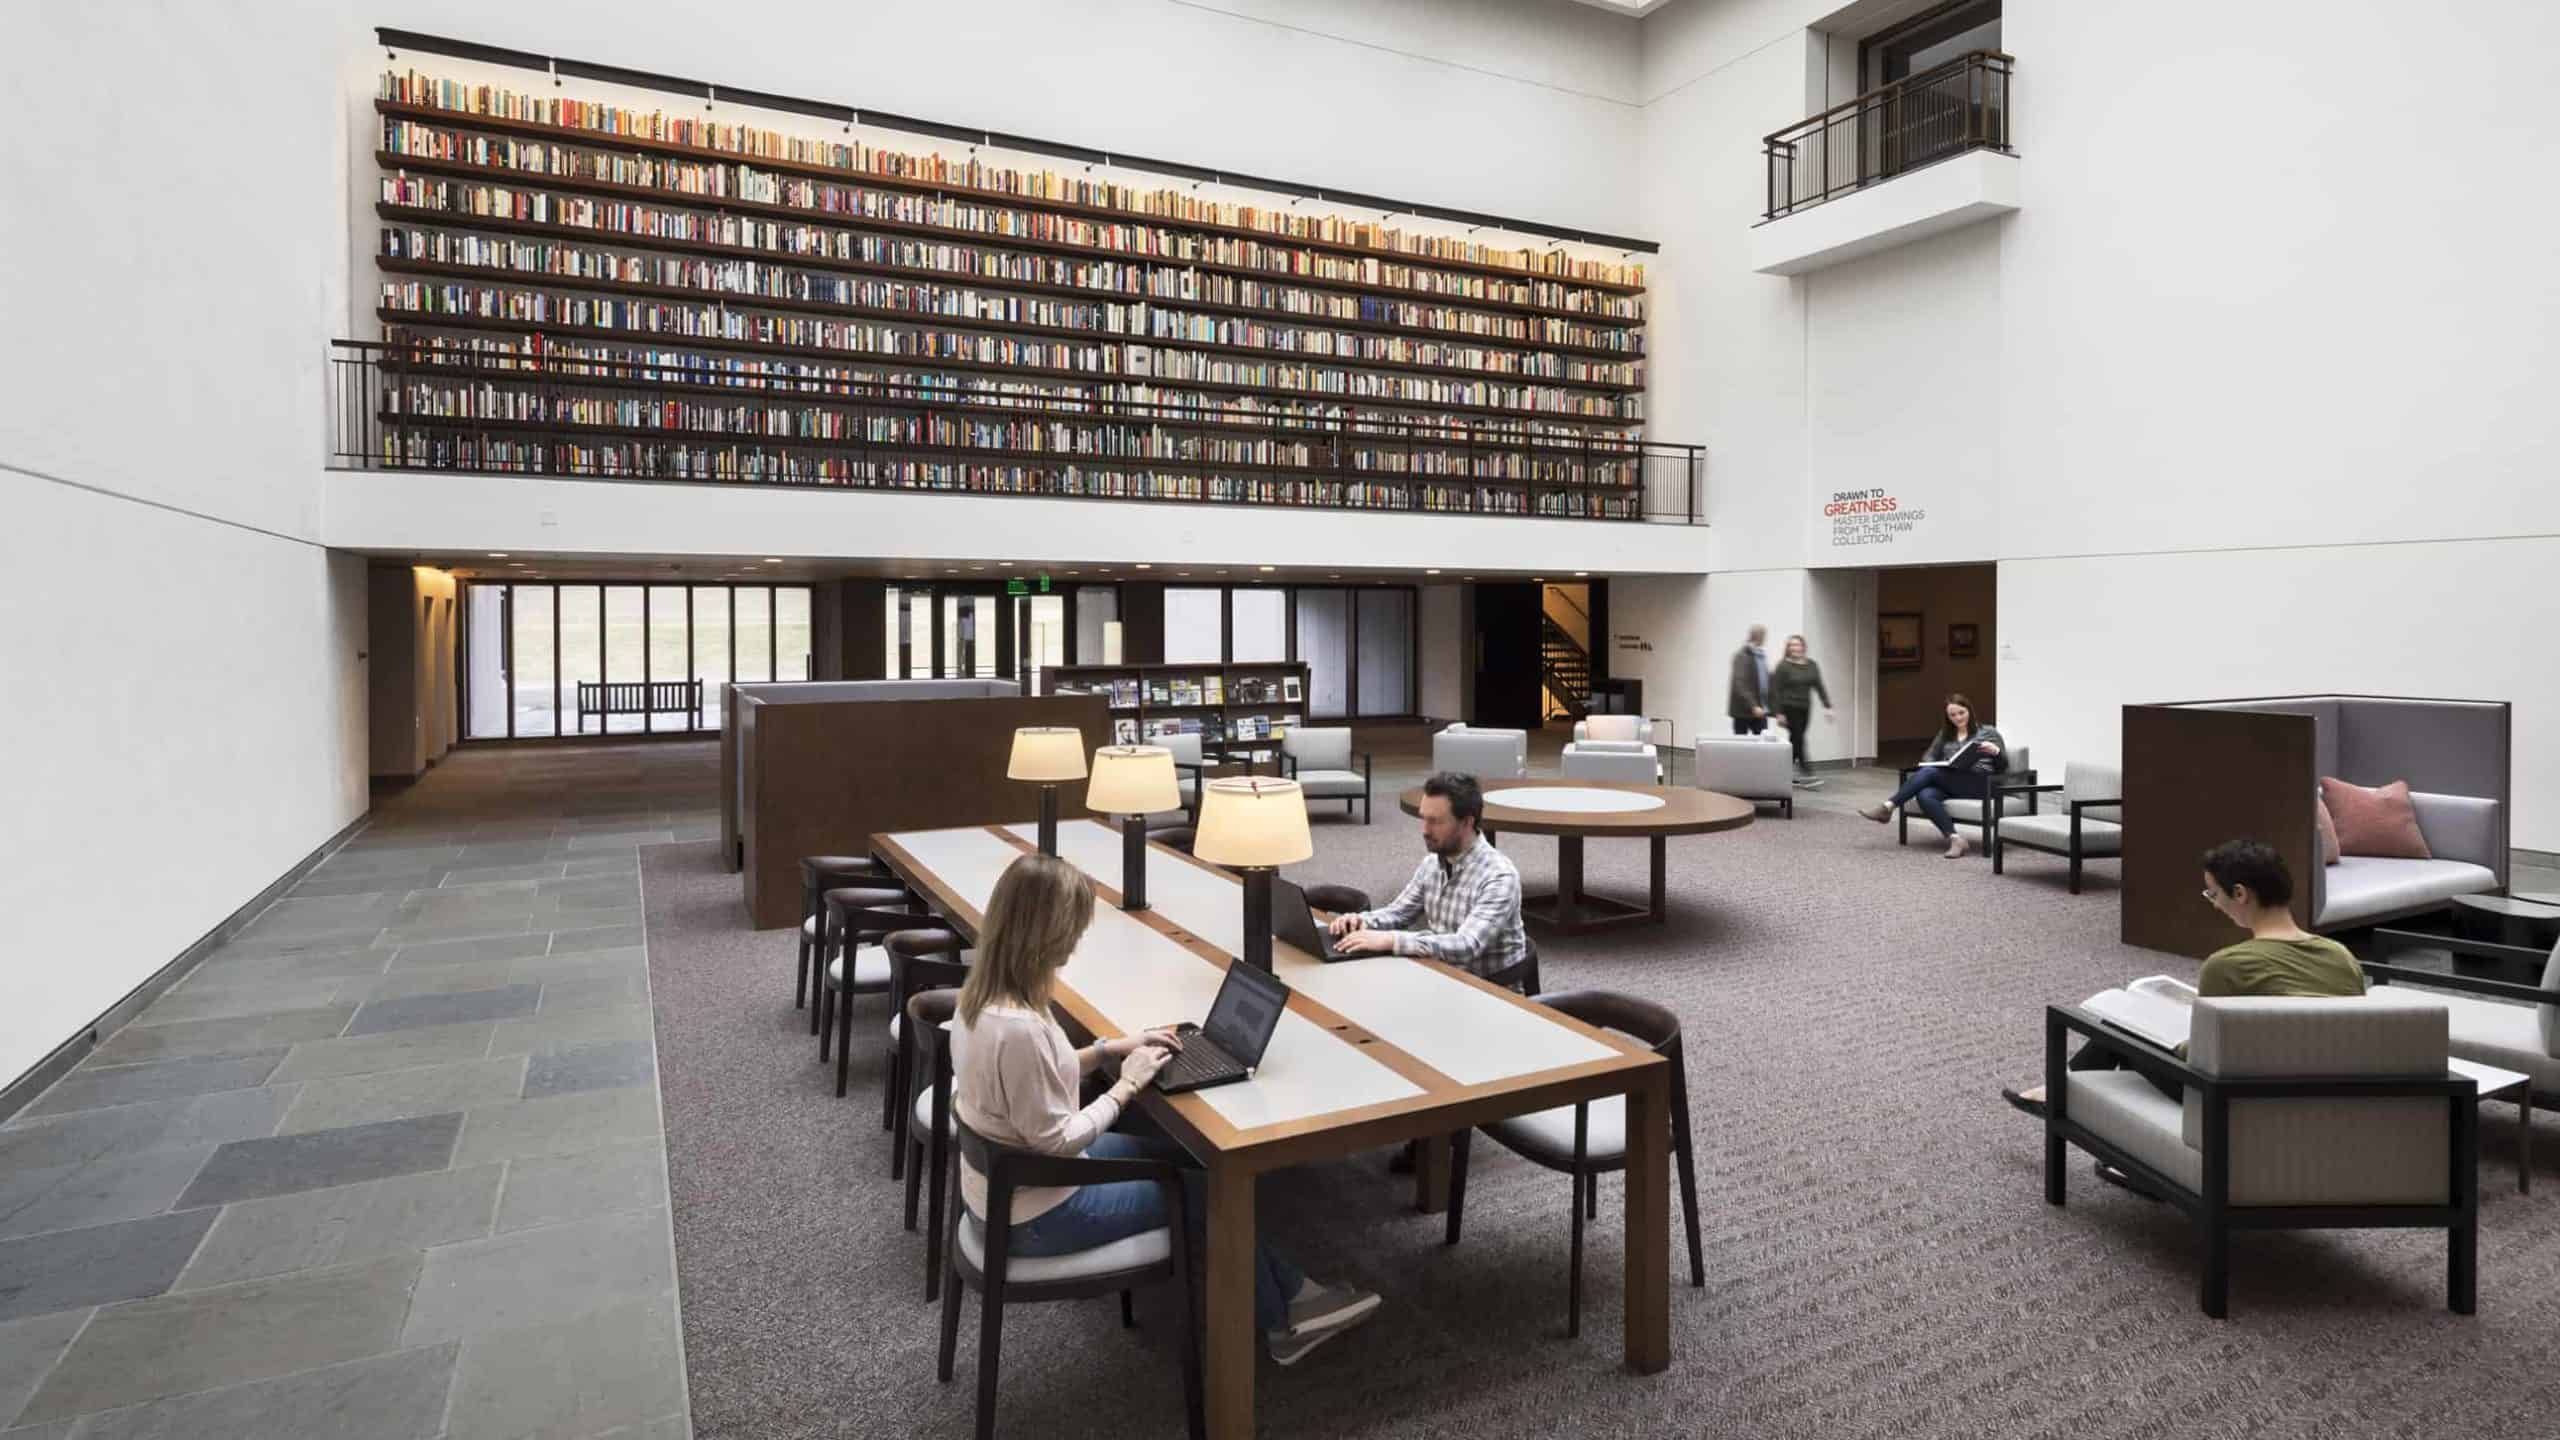 Students study in the reading room at the Clark Art Institute. Photo by James Ewing.